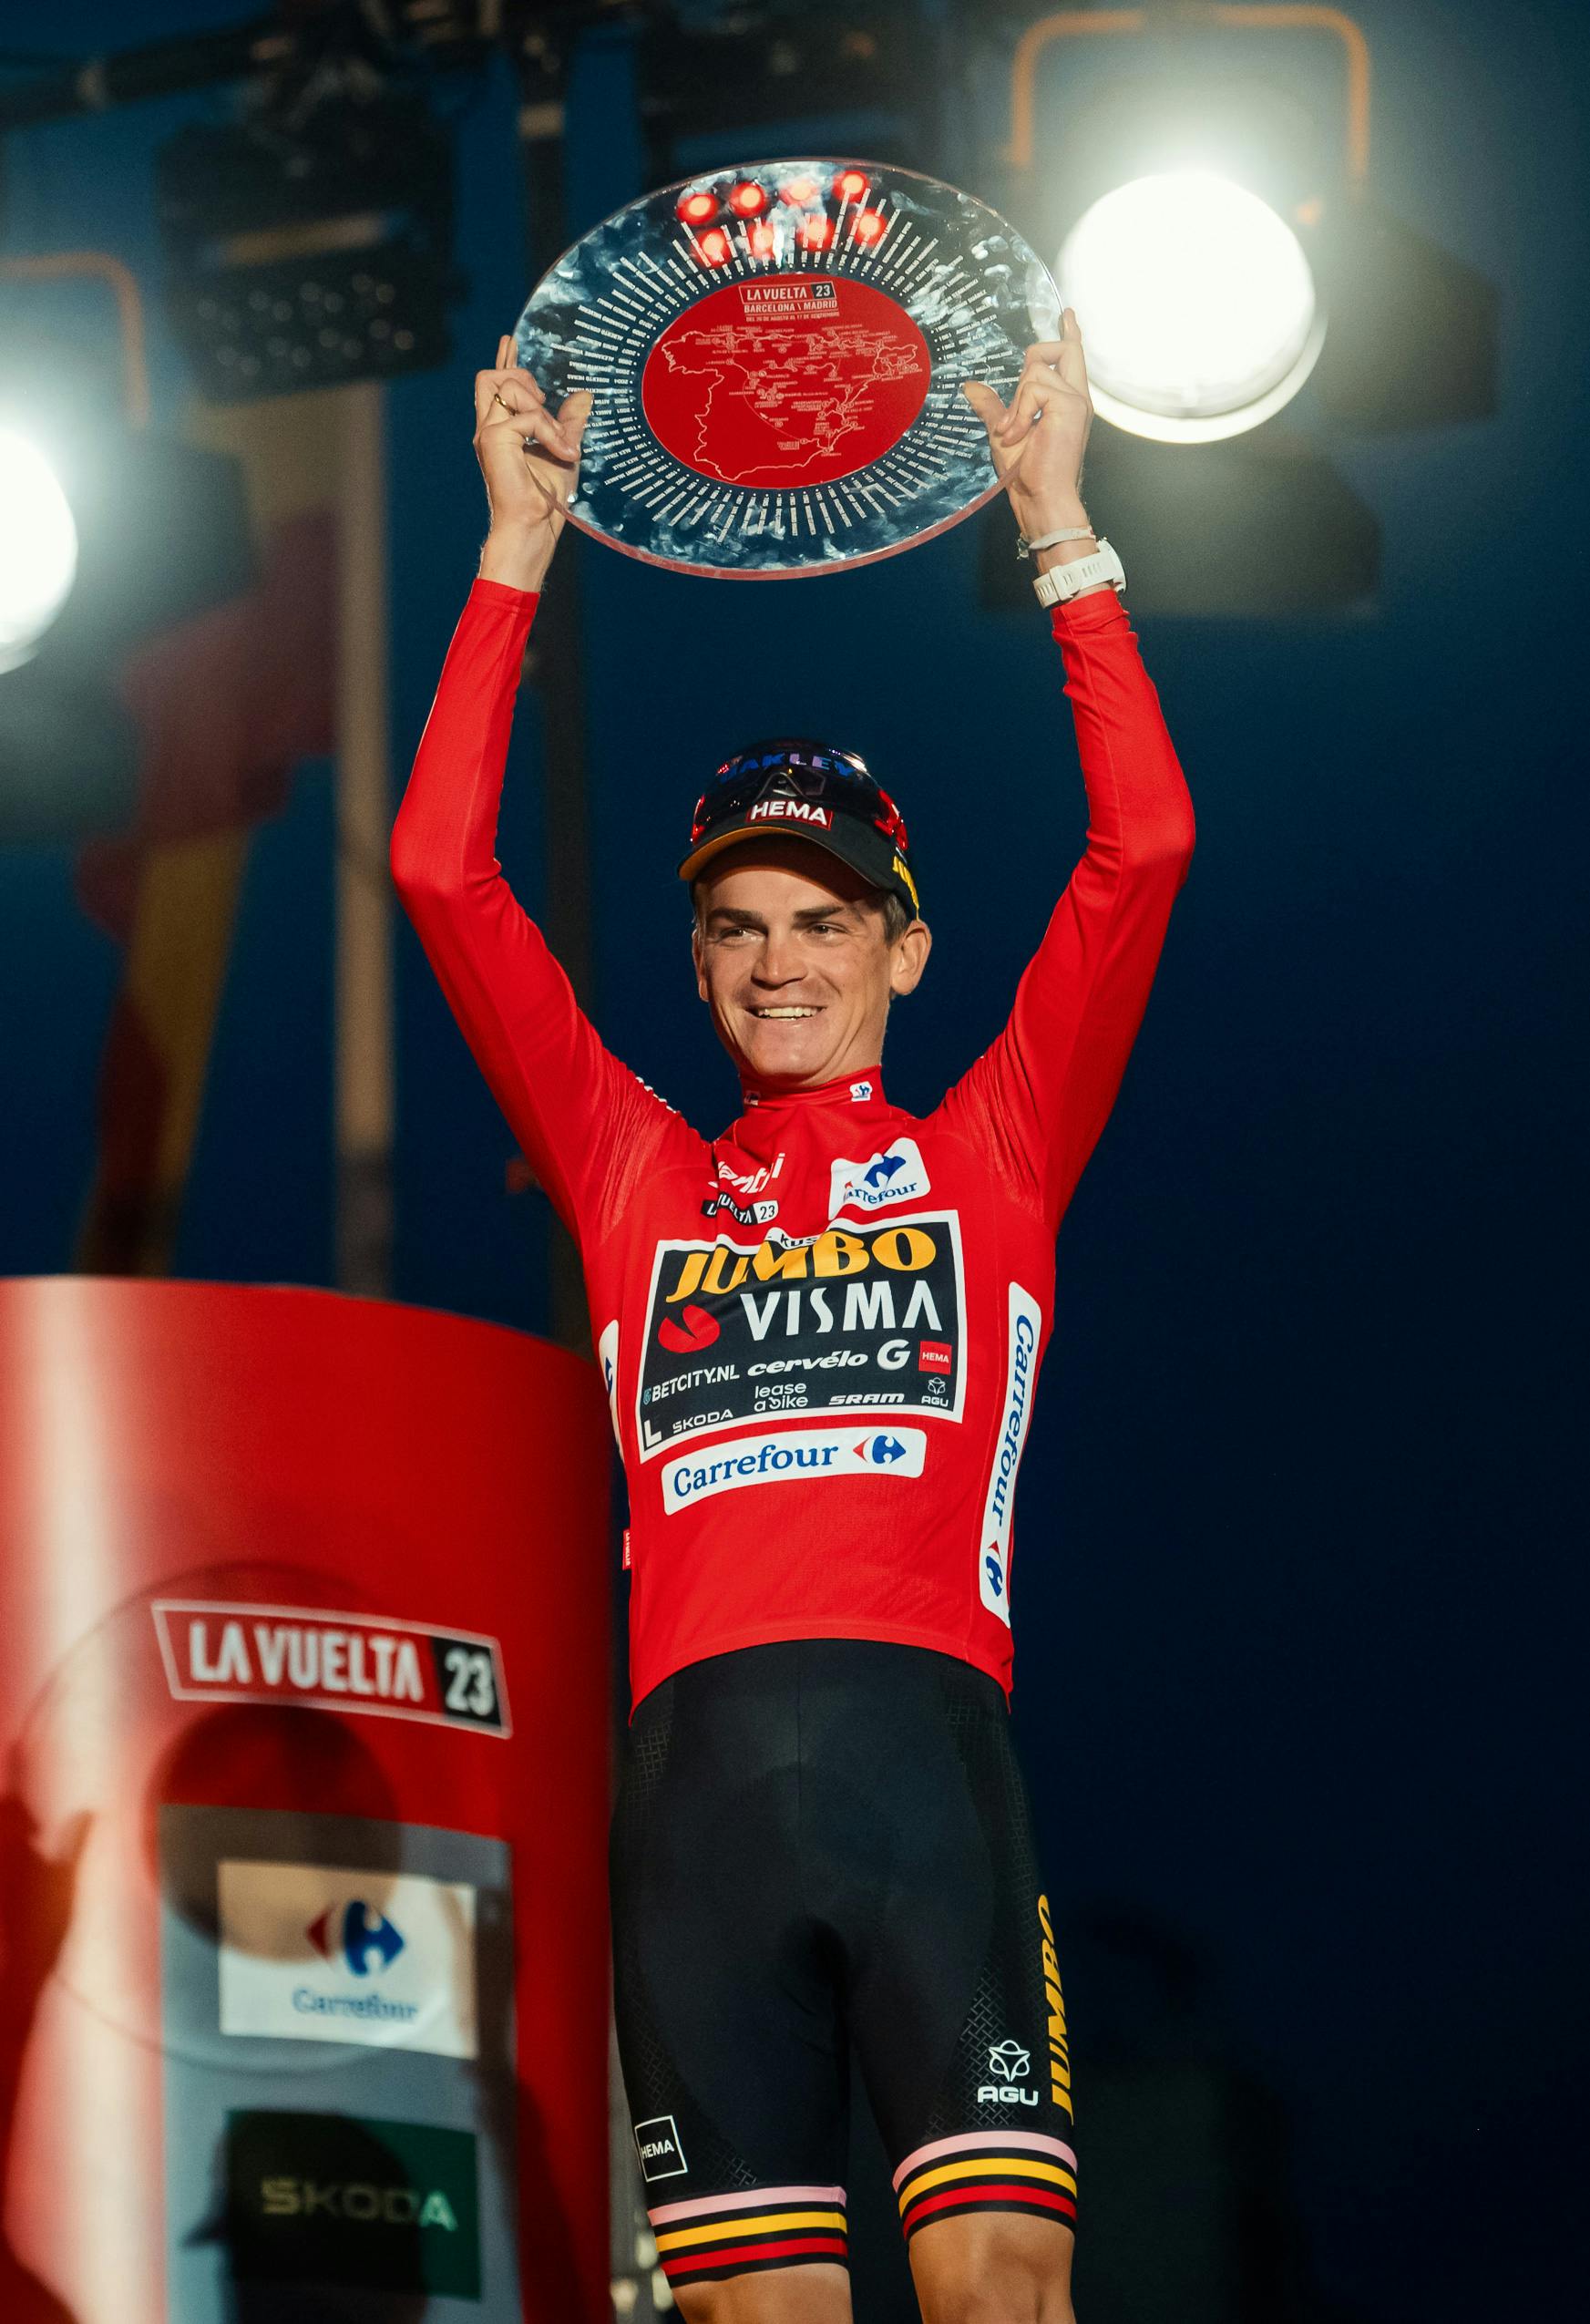 Sepp Kuss in the Red Jersey holding the glass trophy of the Vuelta a España above his head in celebration.